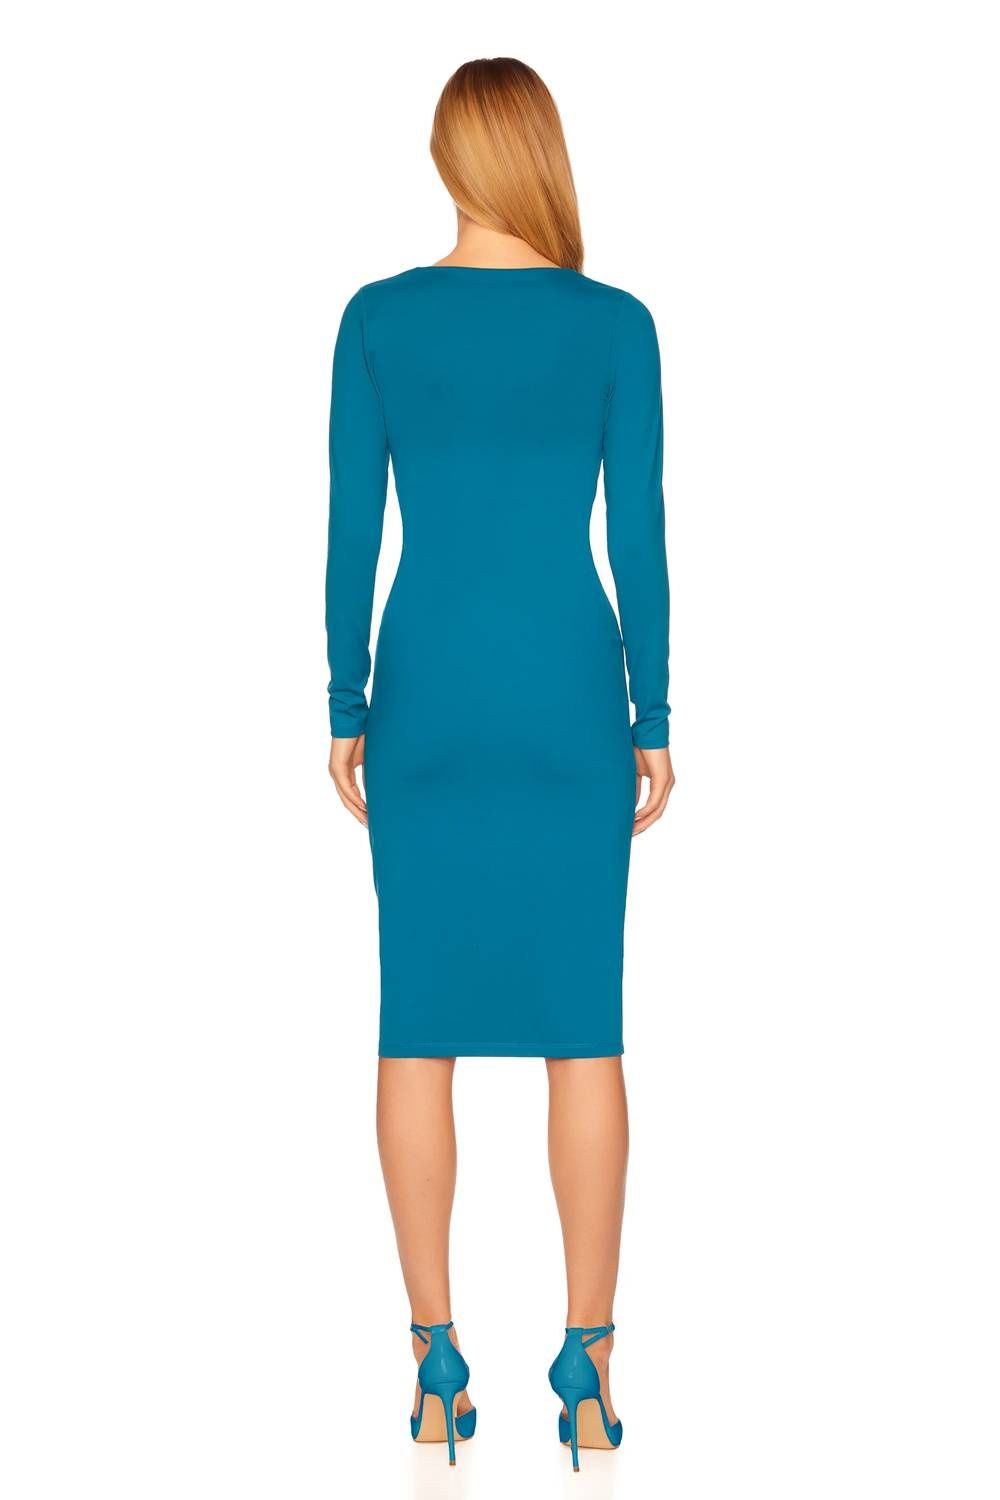 Style 1-3196131808-2901 Susana Monaco Size M Long Sleeve Blue Cocktail Dress on Queenly